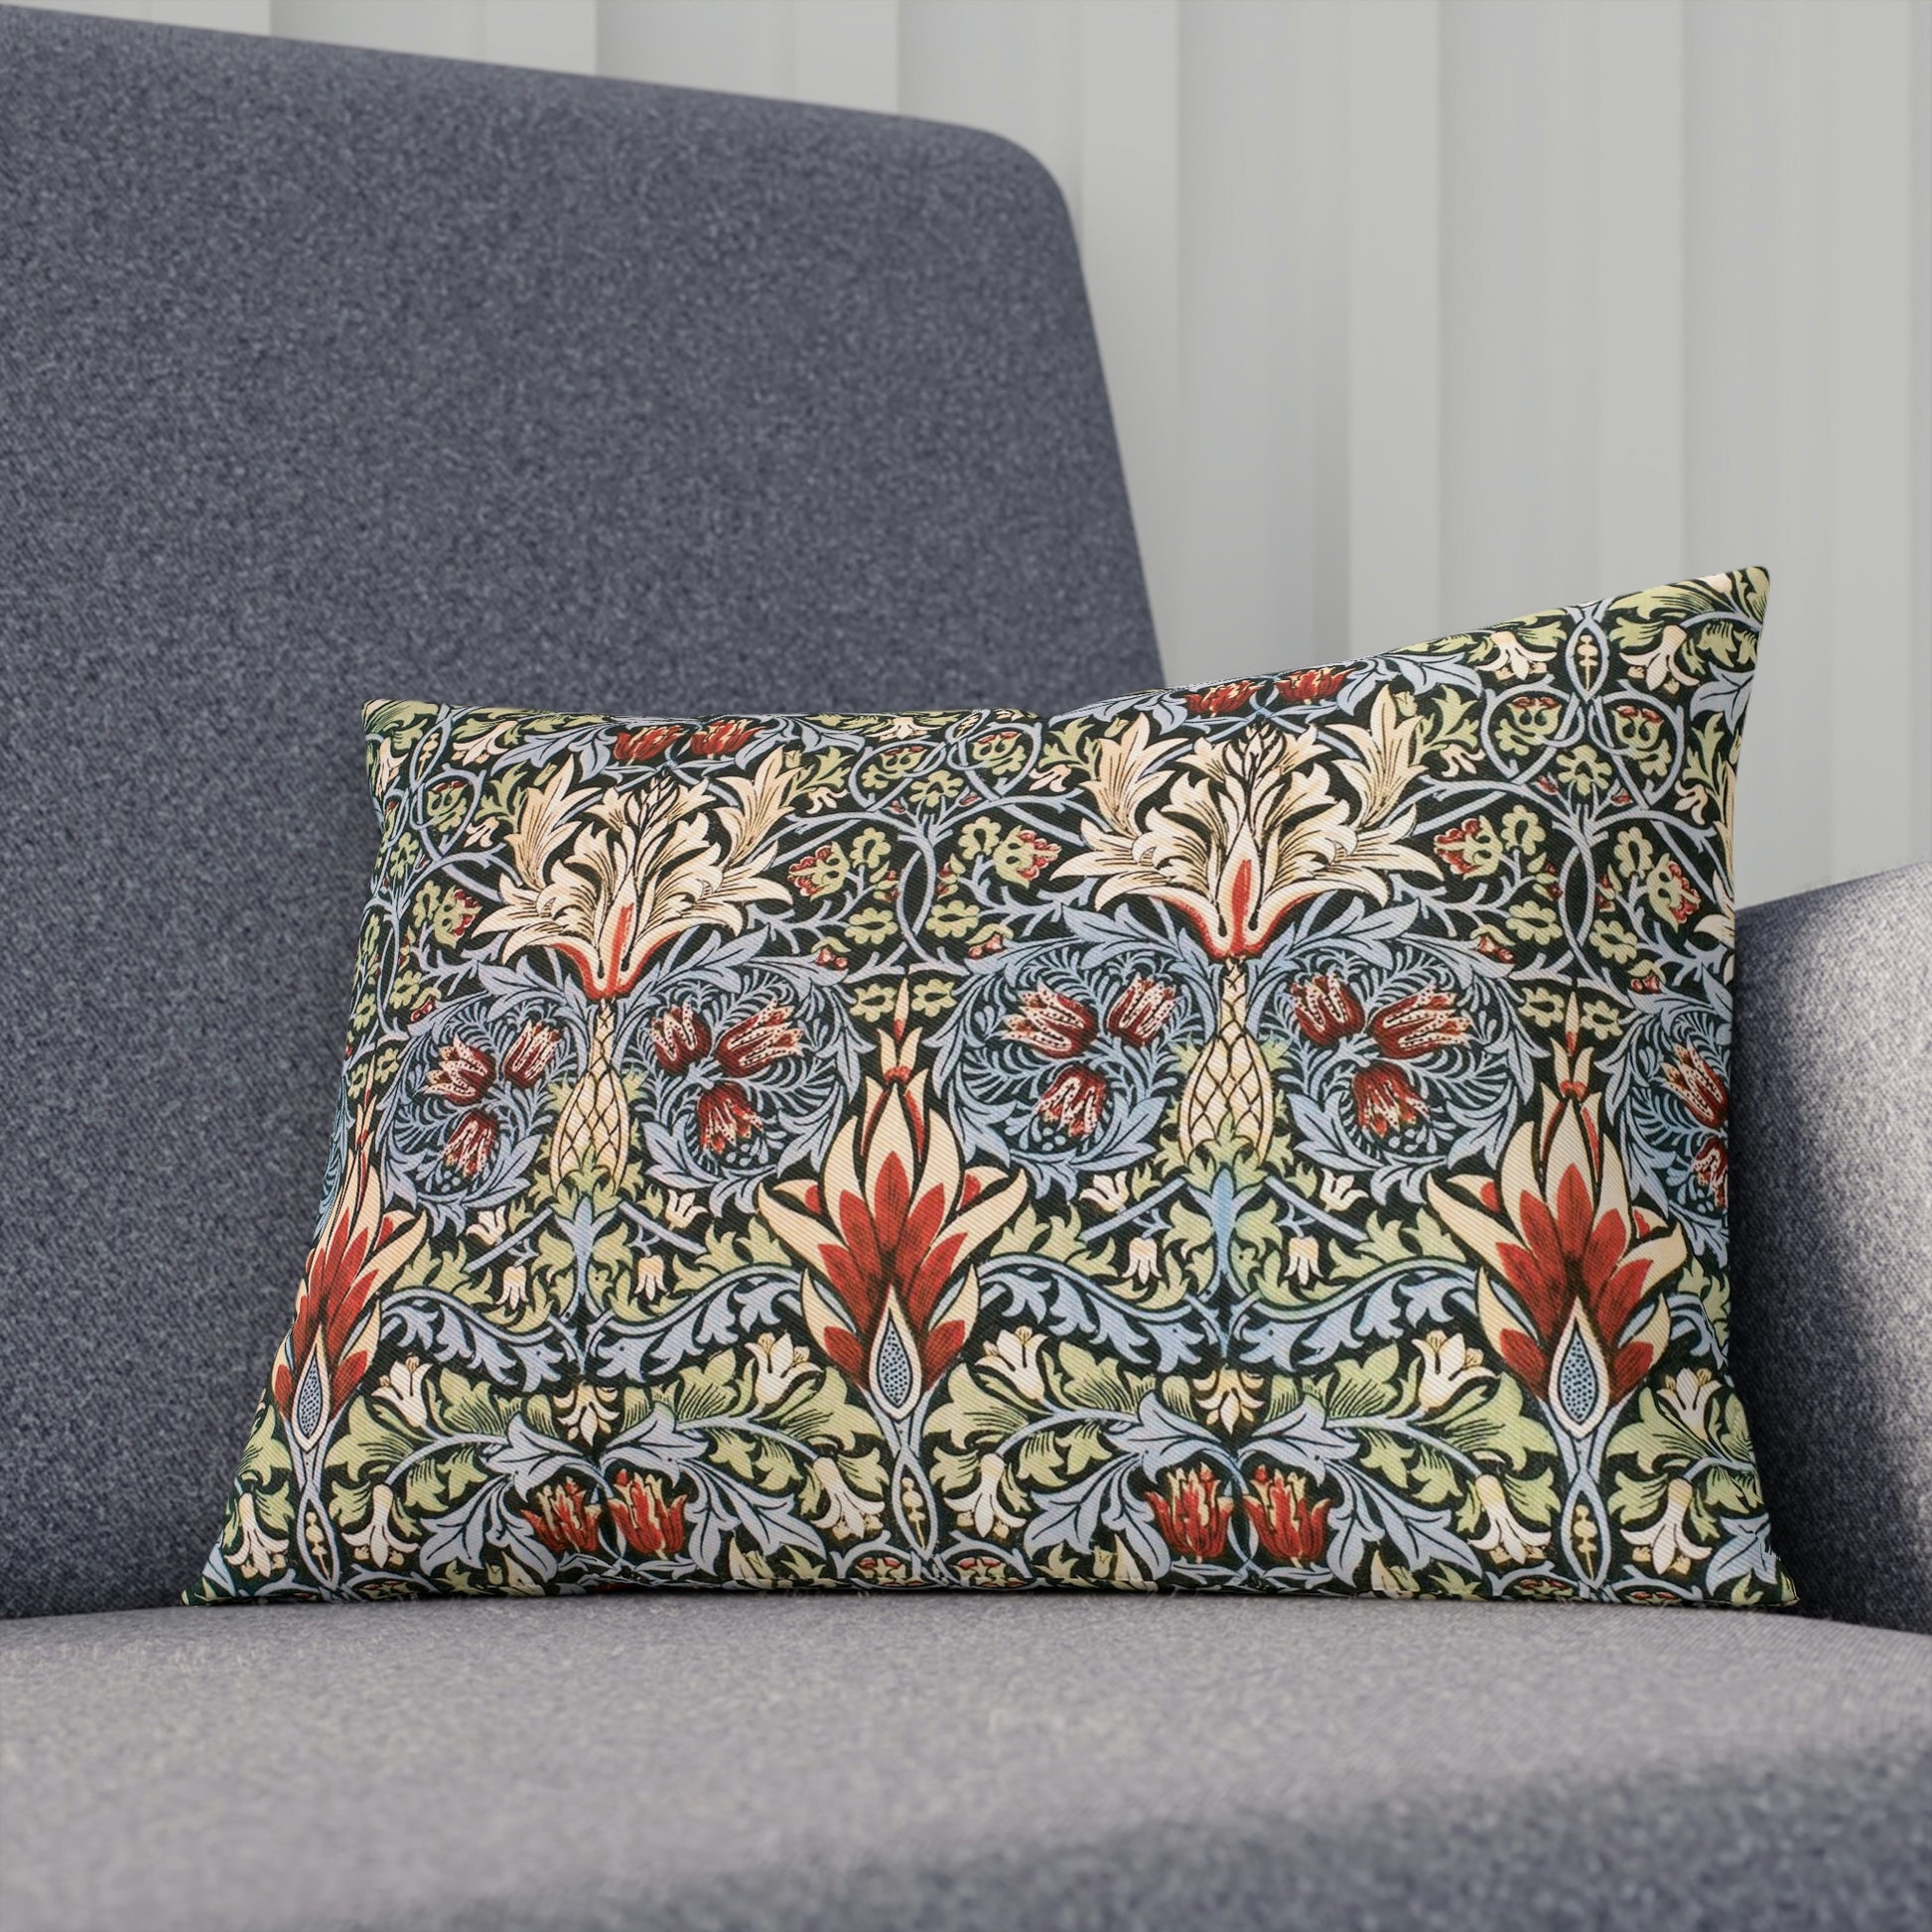 William-Morris-and-Co-Cushion-and-Cushion-Cover-Snakeshead-Collection-15